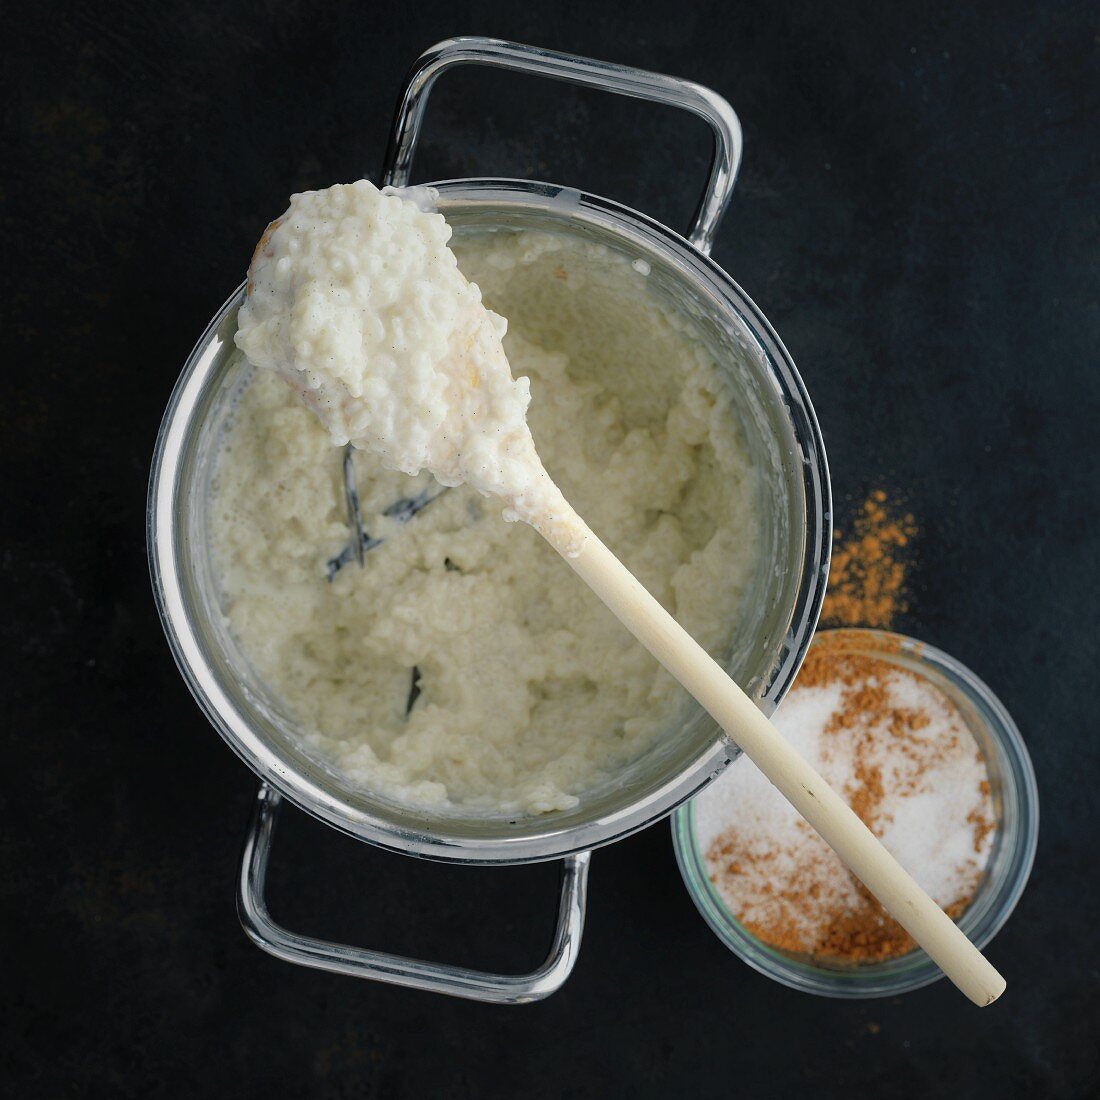 Classic rice pudding with cinnamon and sugar